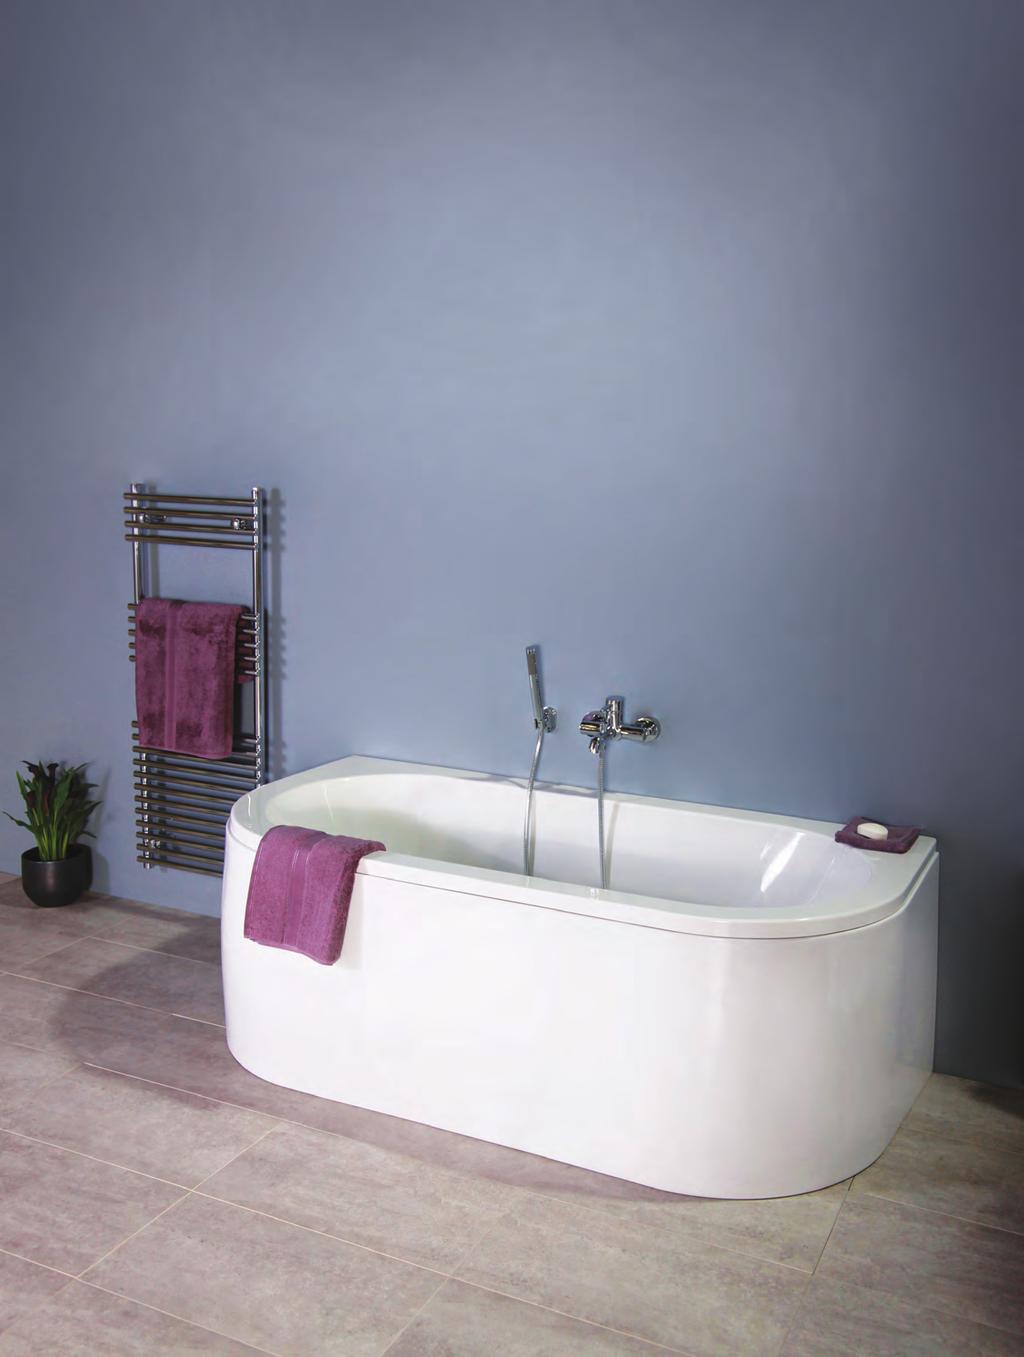 BATHS - Beta Cast Upgrade For Only 99 Developed with quality and individuality in mind Beta Cast is a process of super-reinforcement which creates a rigid, super strong acrylic bath.